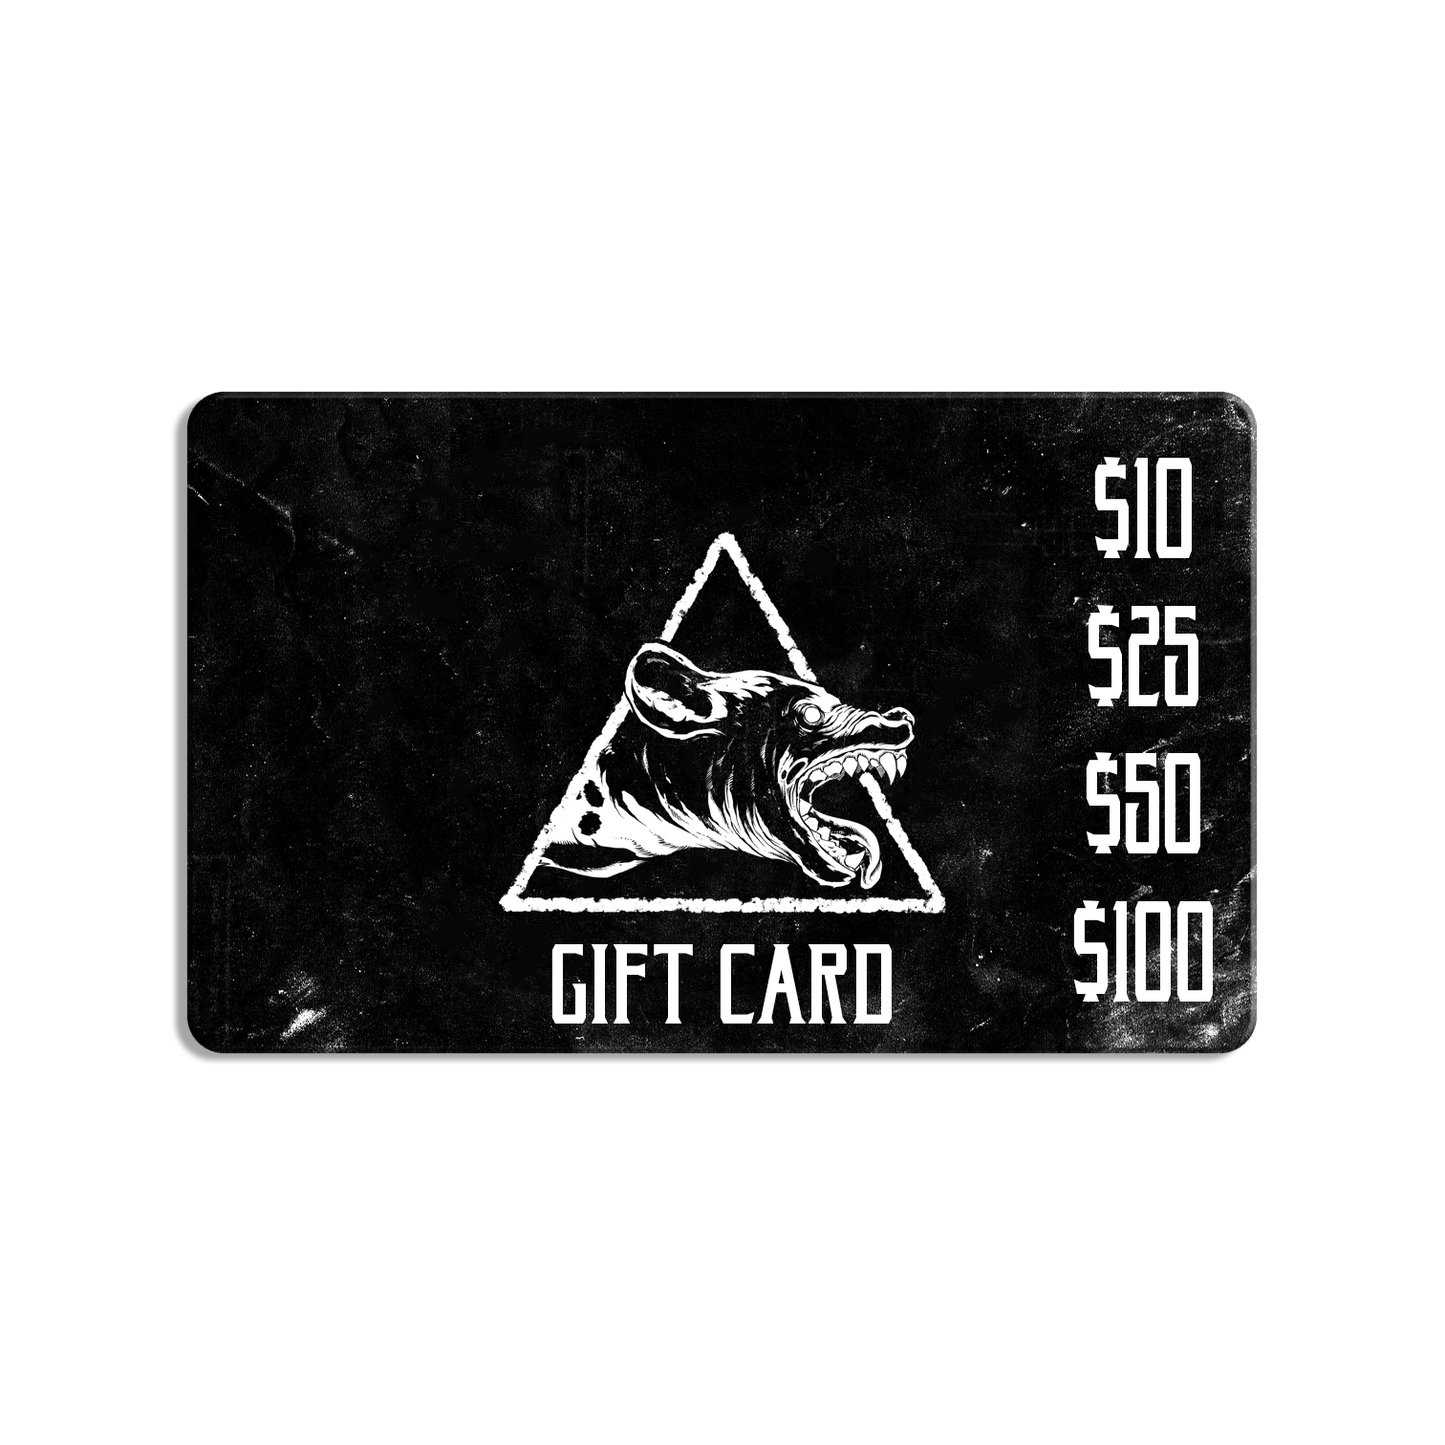 Any means necessary gift card 